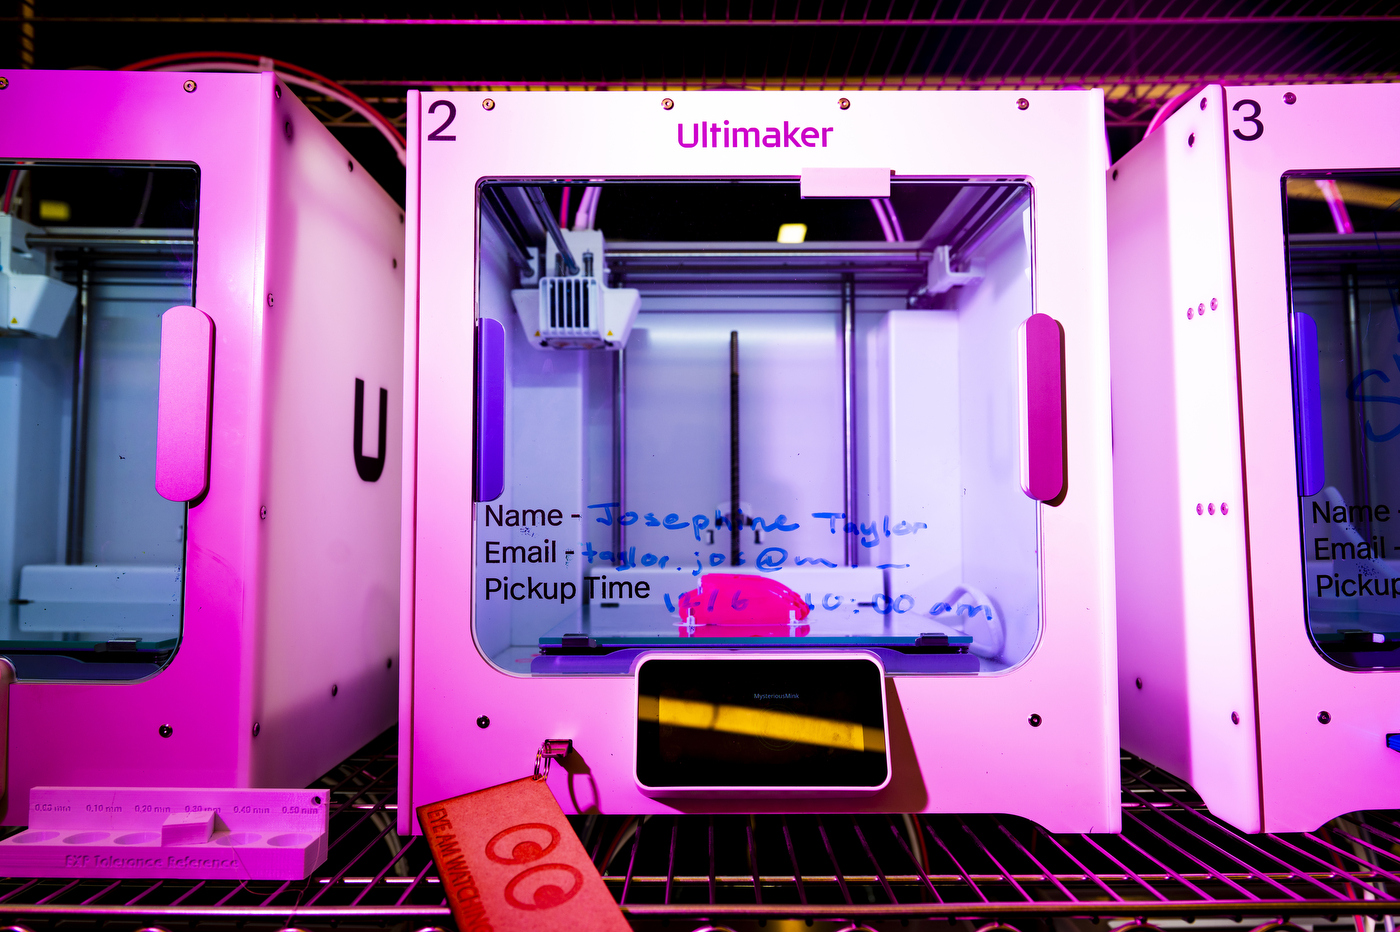 An Ultimaker 3D printer creating a prosthetic hand.